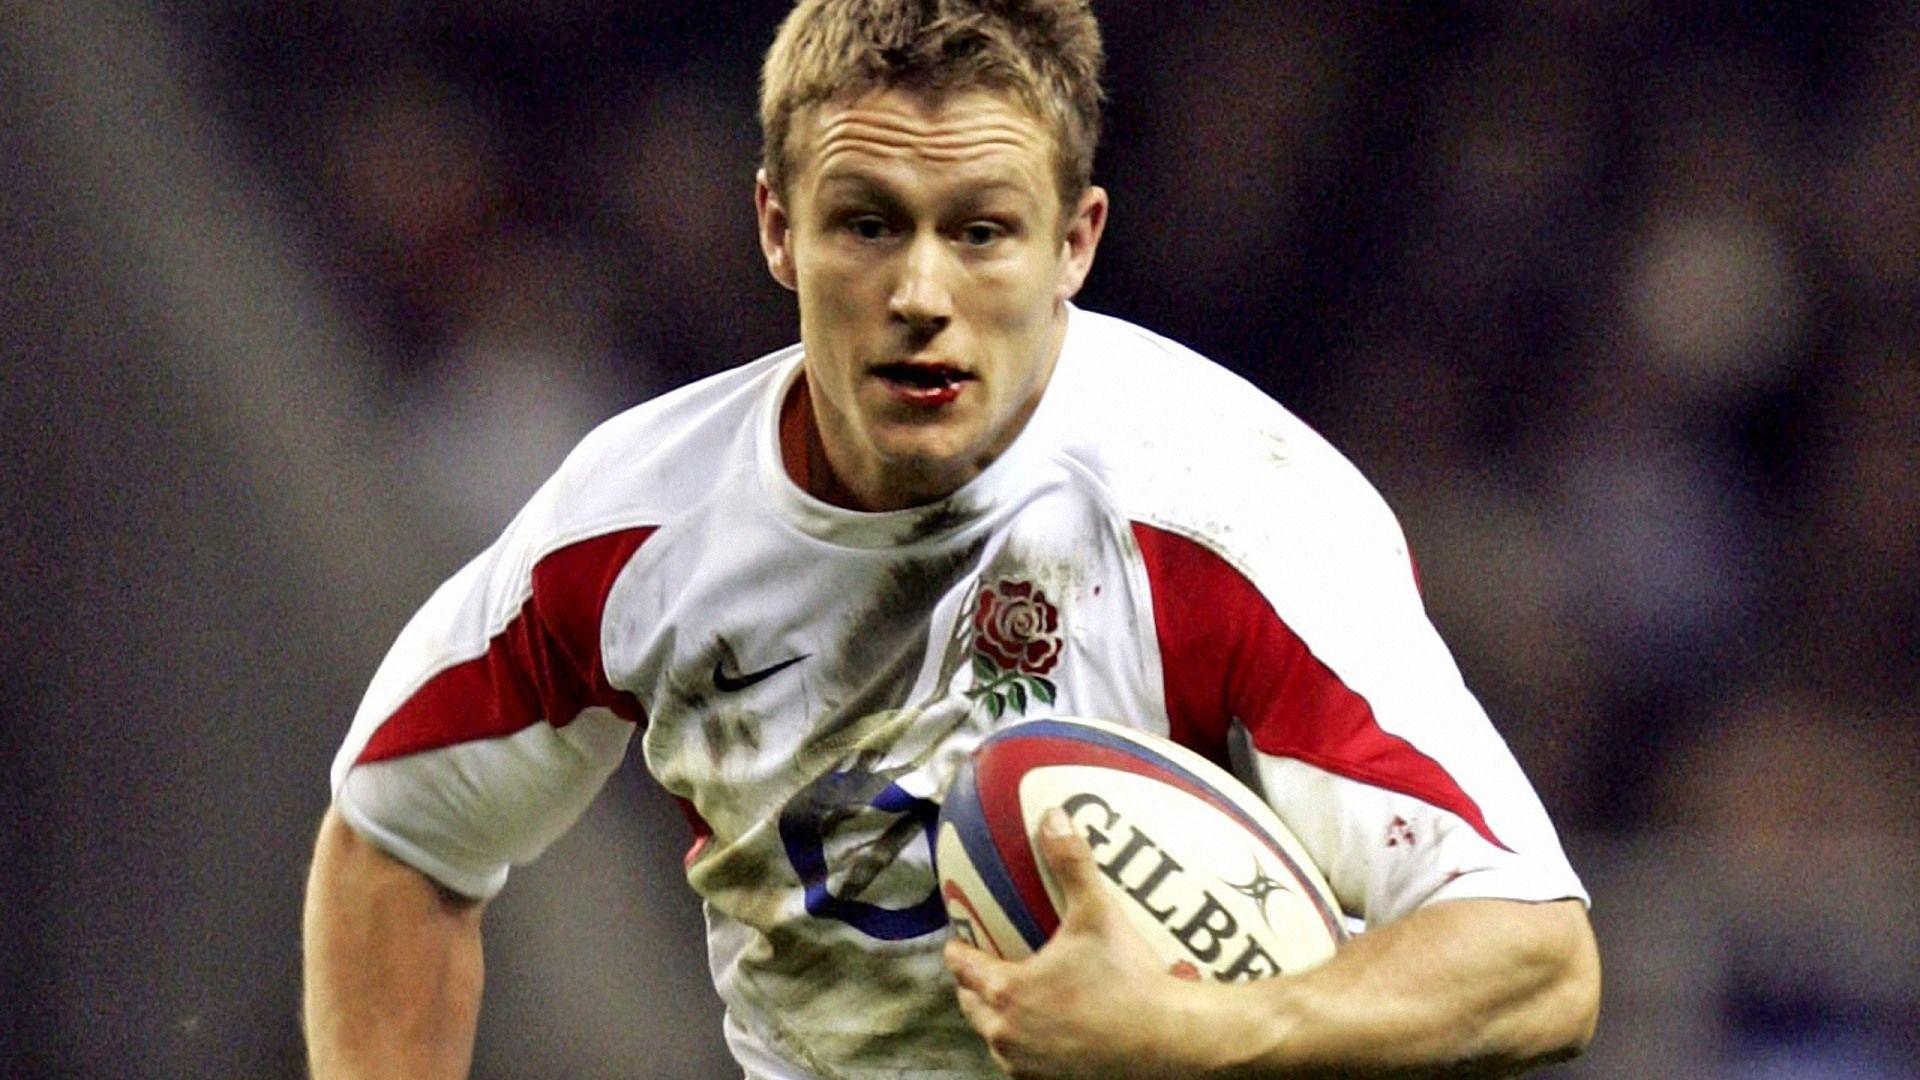 England Rugby Team Player In Action 1920x1080 HD Rugby